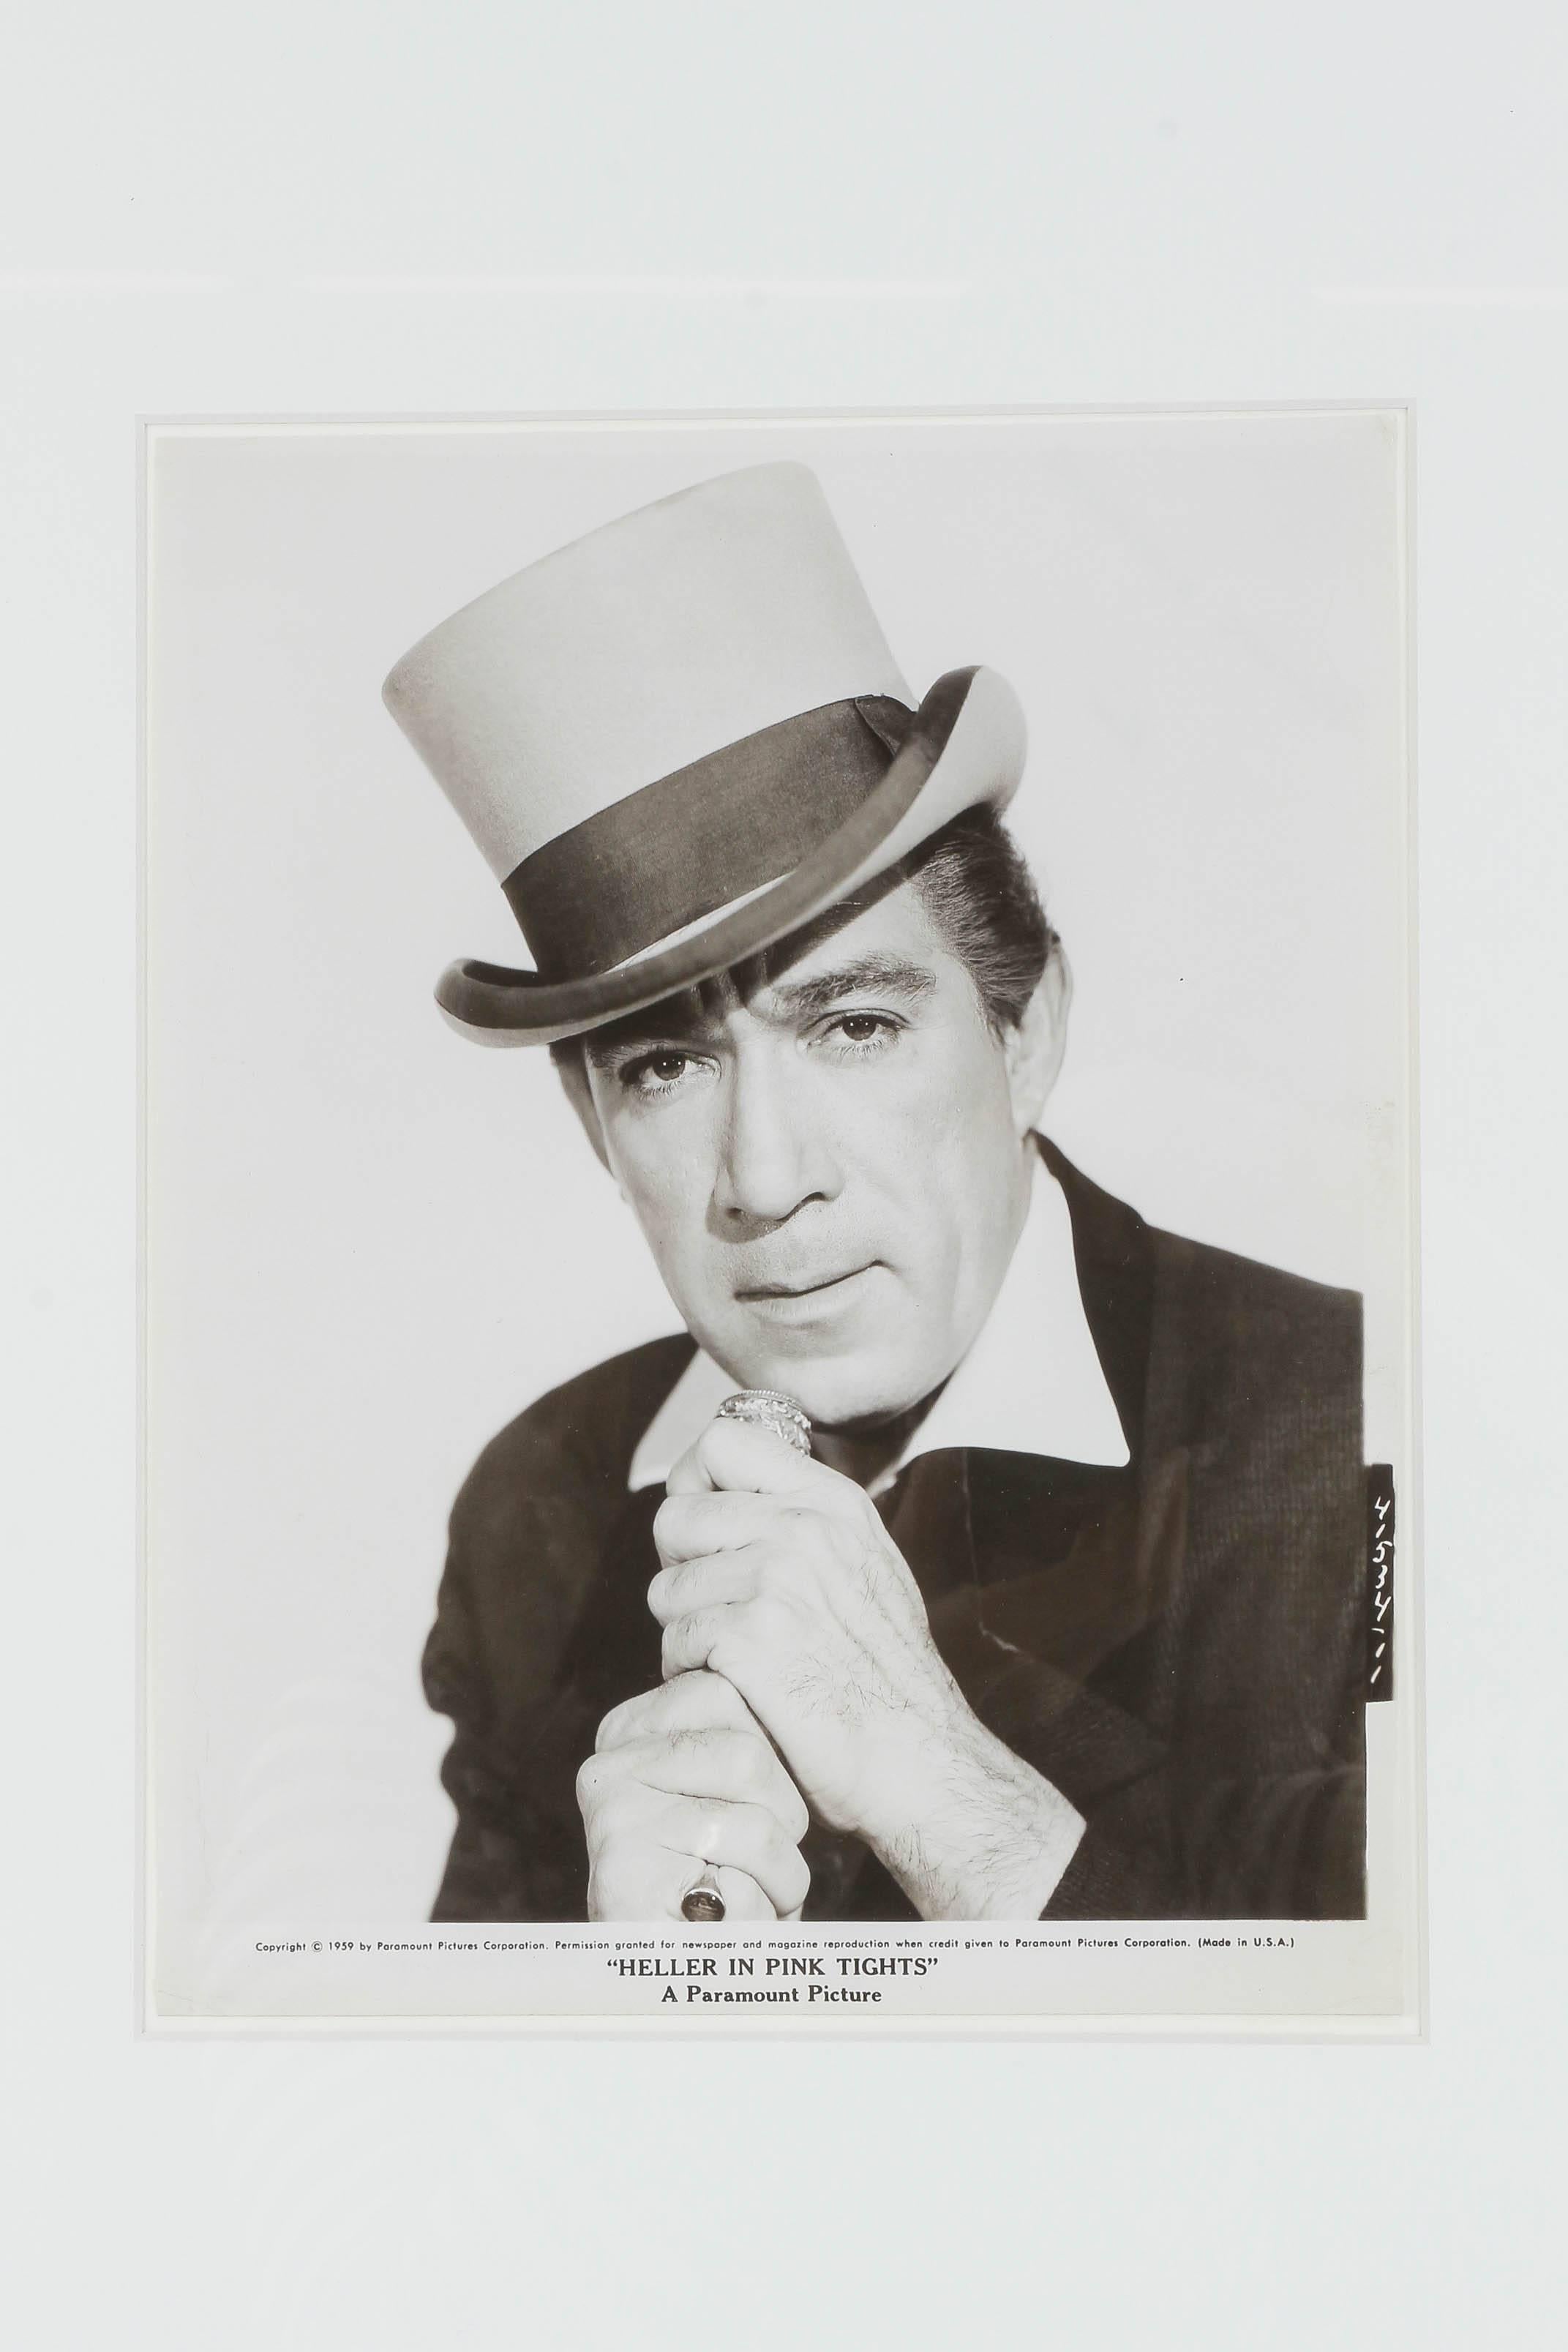 Original film photo by Paramount Pictures for the 1960 released movie Heller in Pink Tights. Photo of the main character Anthony Quinn as Tom Healy. Frame is made of black lacquered wood, print on shiny photo paper, numbered on the side.